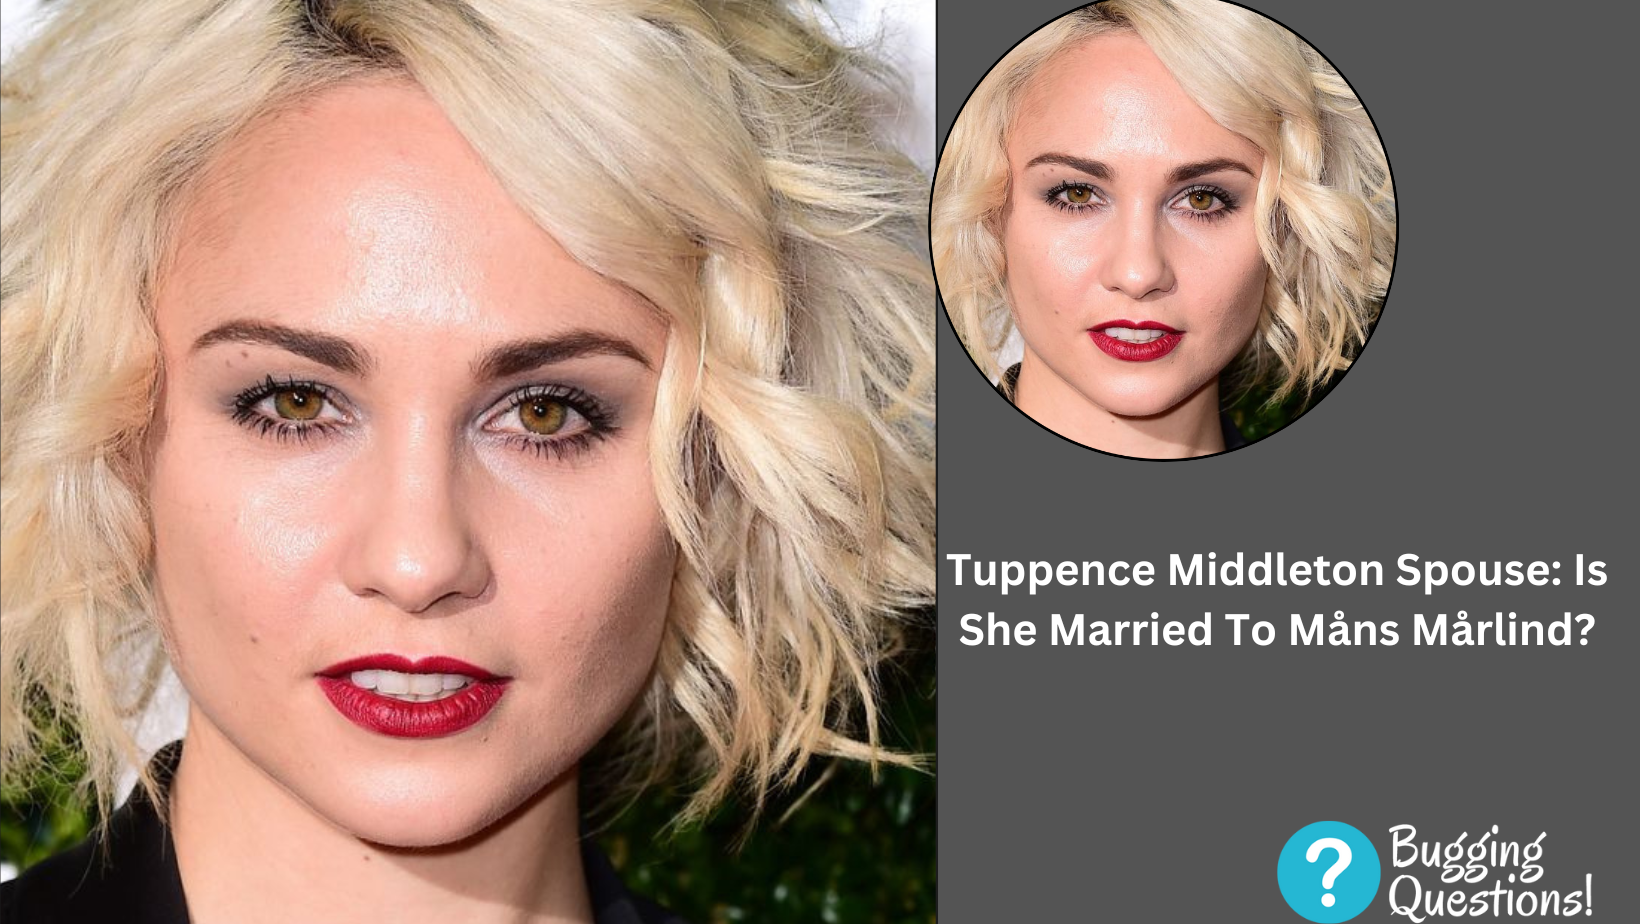 Tuppence Middleton Spouse: Is She Married To Måns Mårlind?